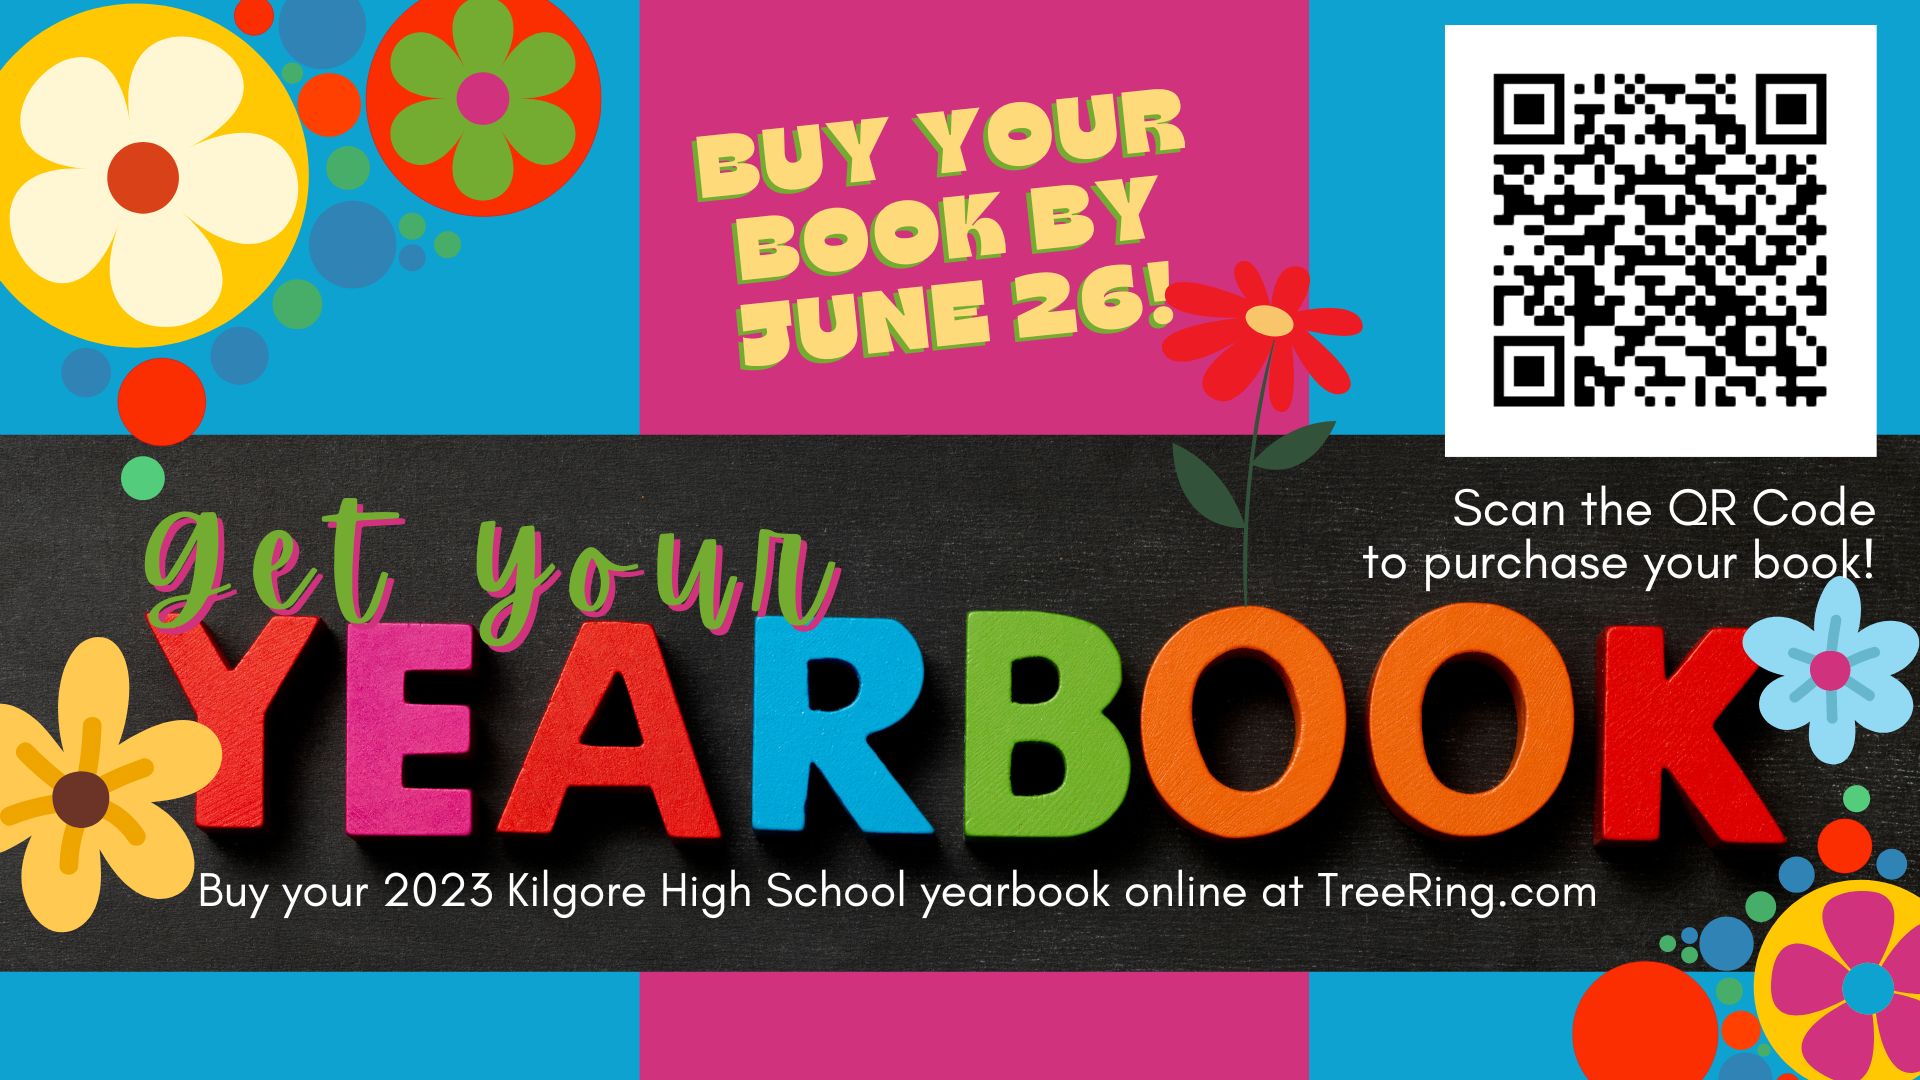 Buy your Yearbook at Treering.com